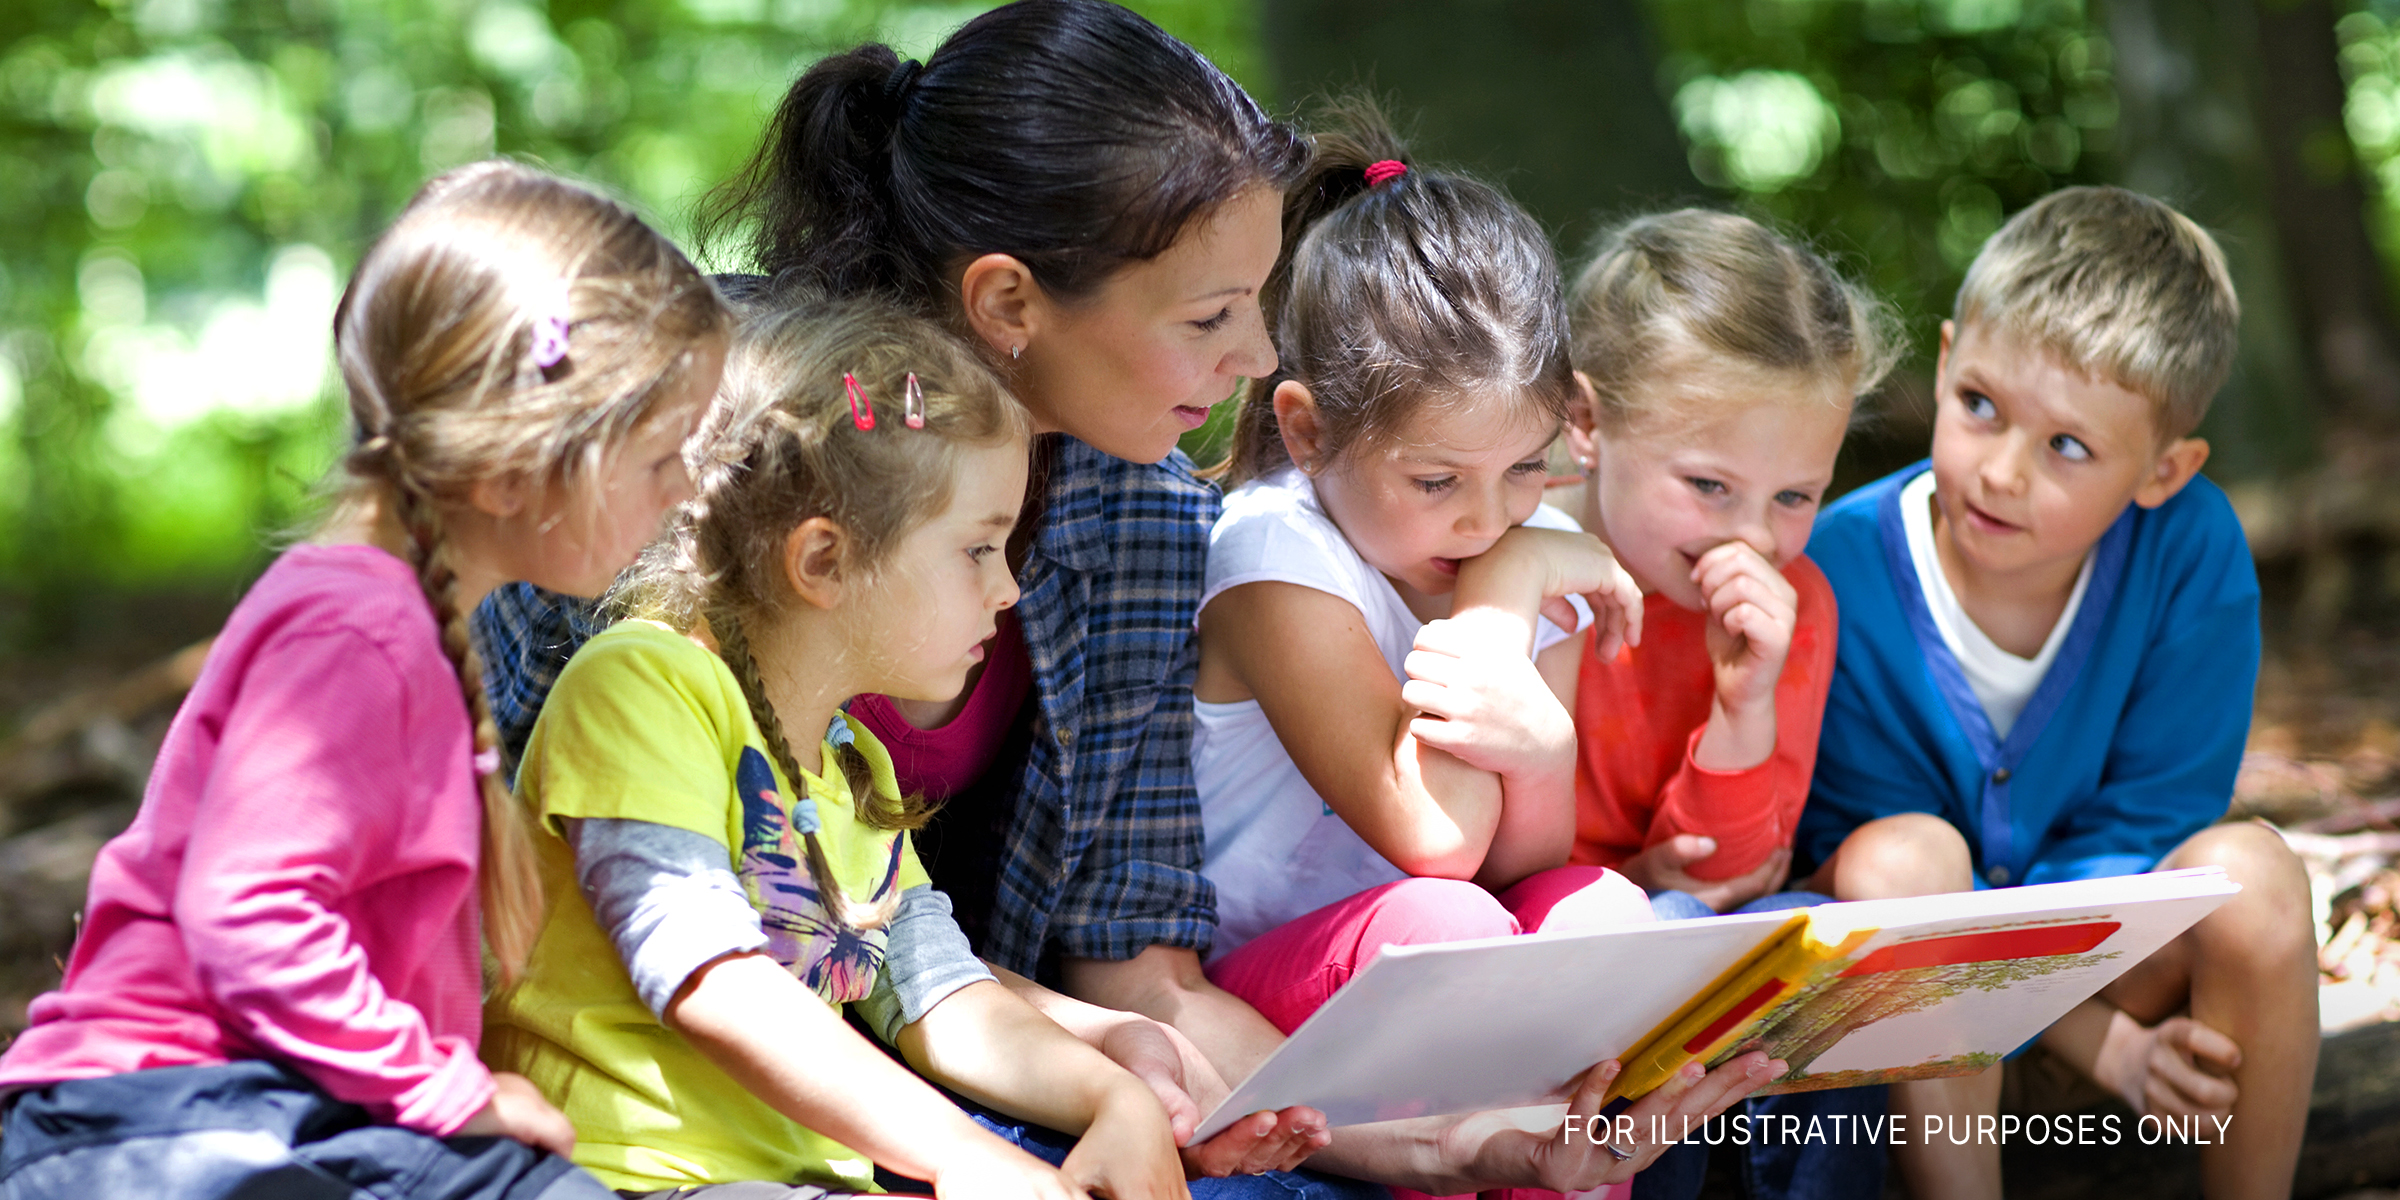 Woman reading a book to young children | Source: Shutterstock